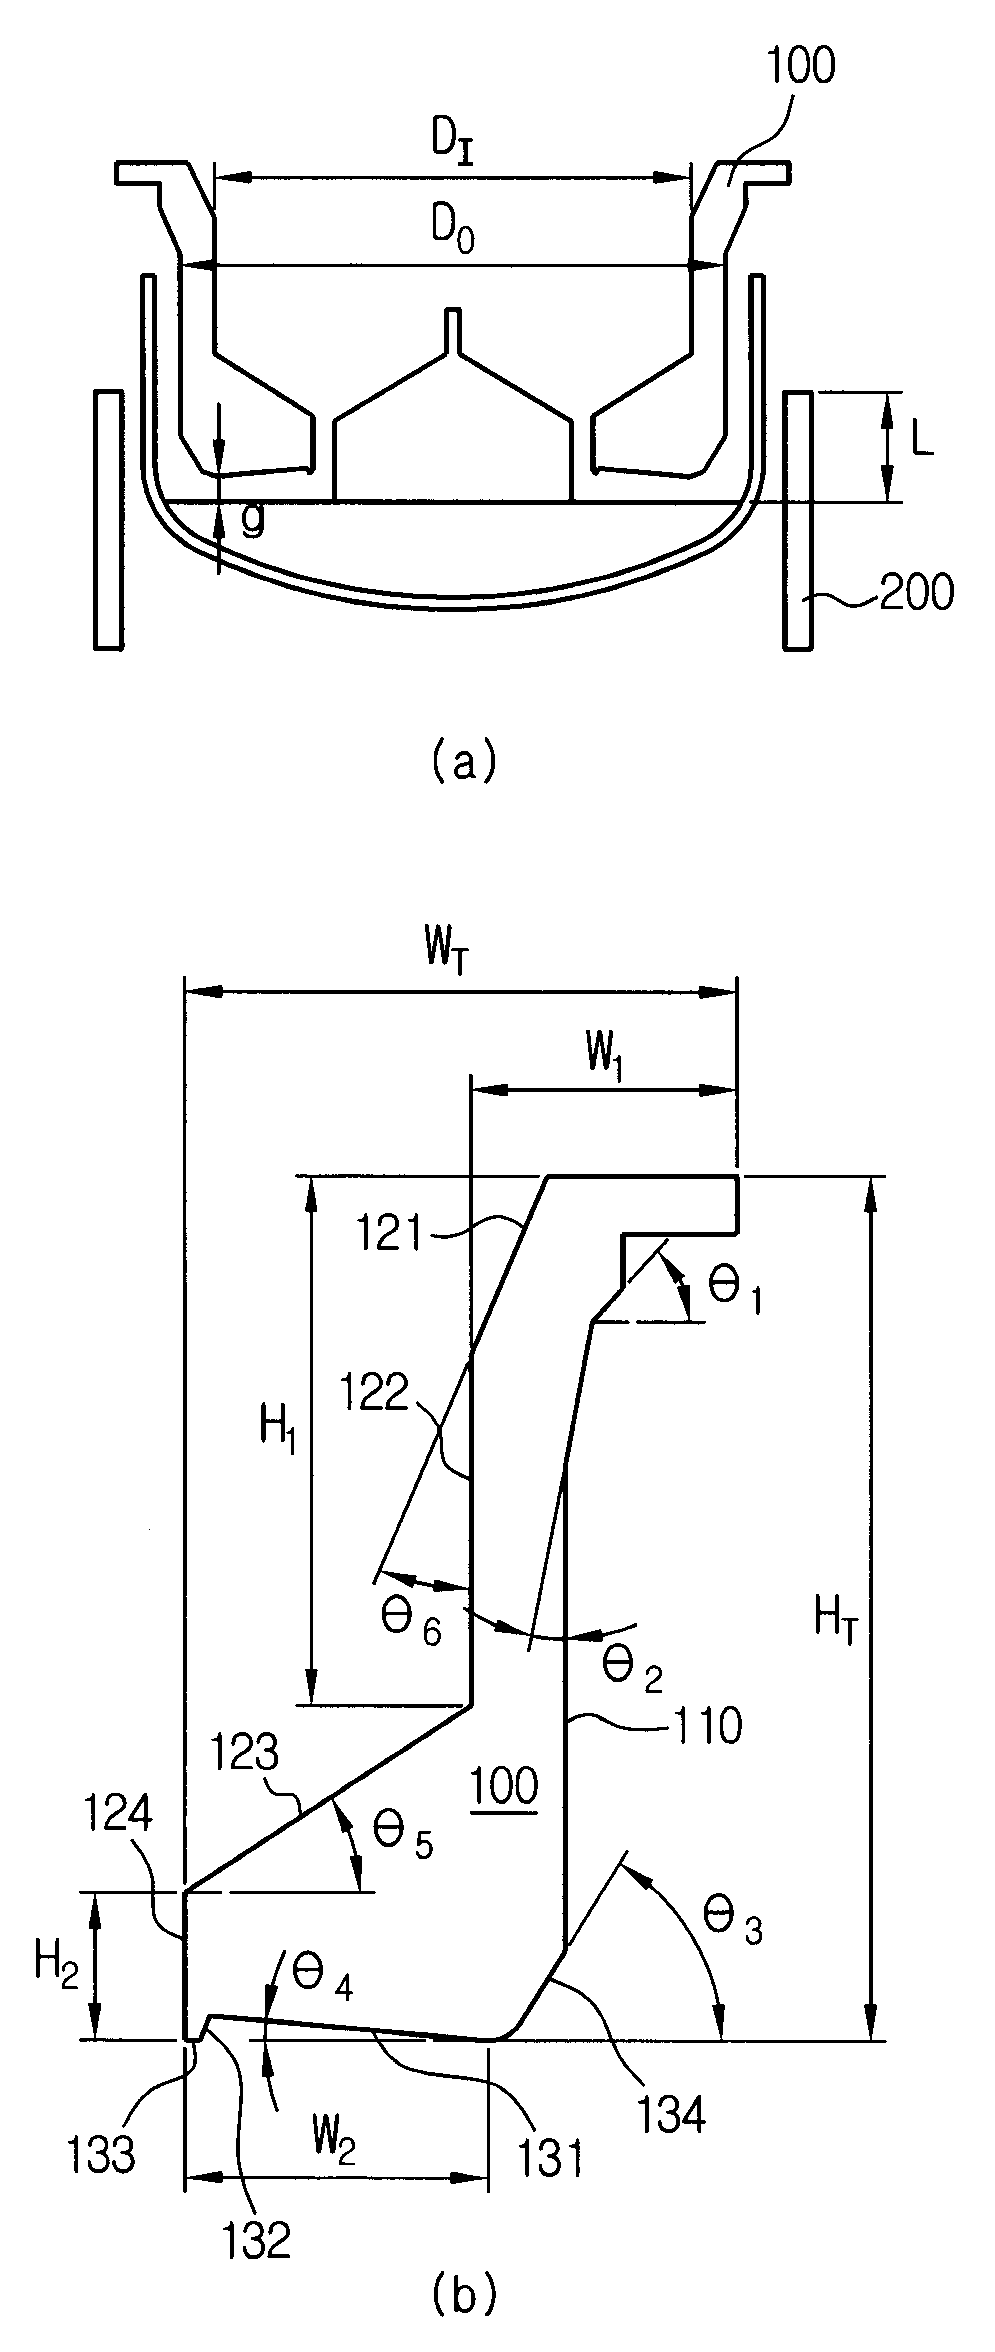 2-dimensional line-defects controlled silicon ingot, wafer and epitaxial wafer, and manufacturing process and apparatus therefor